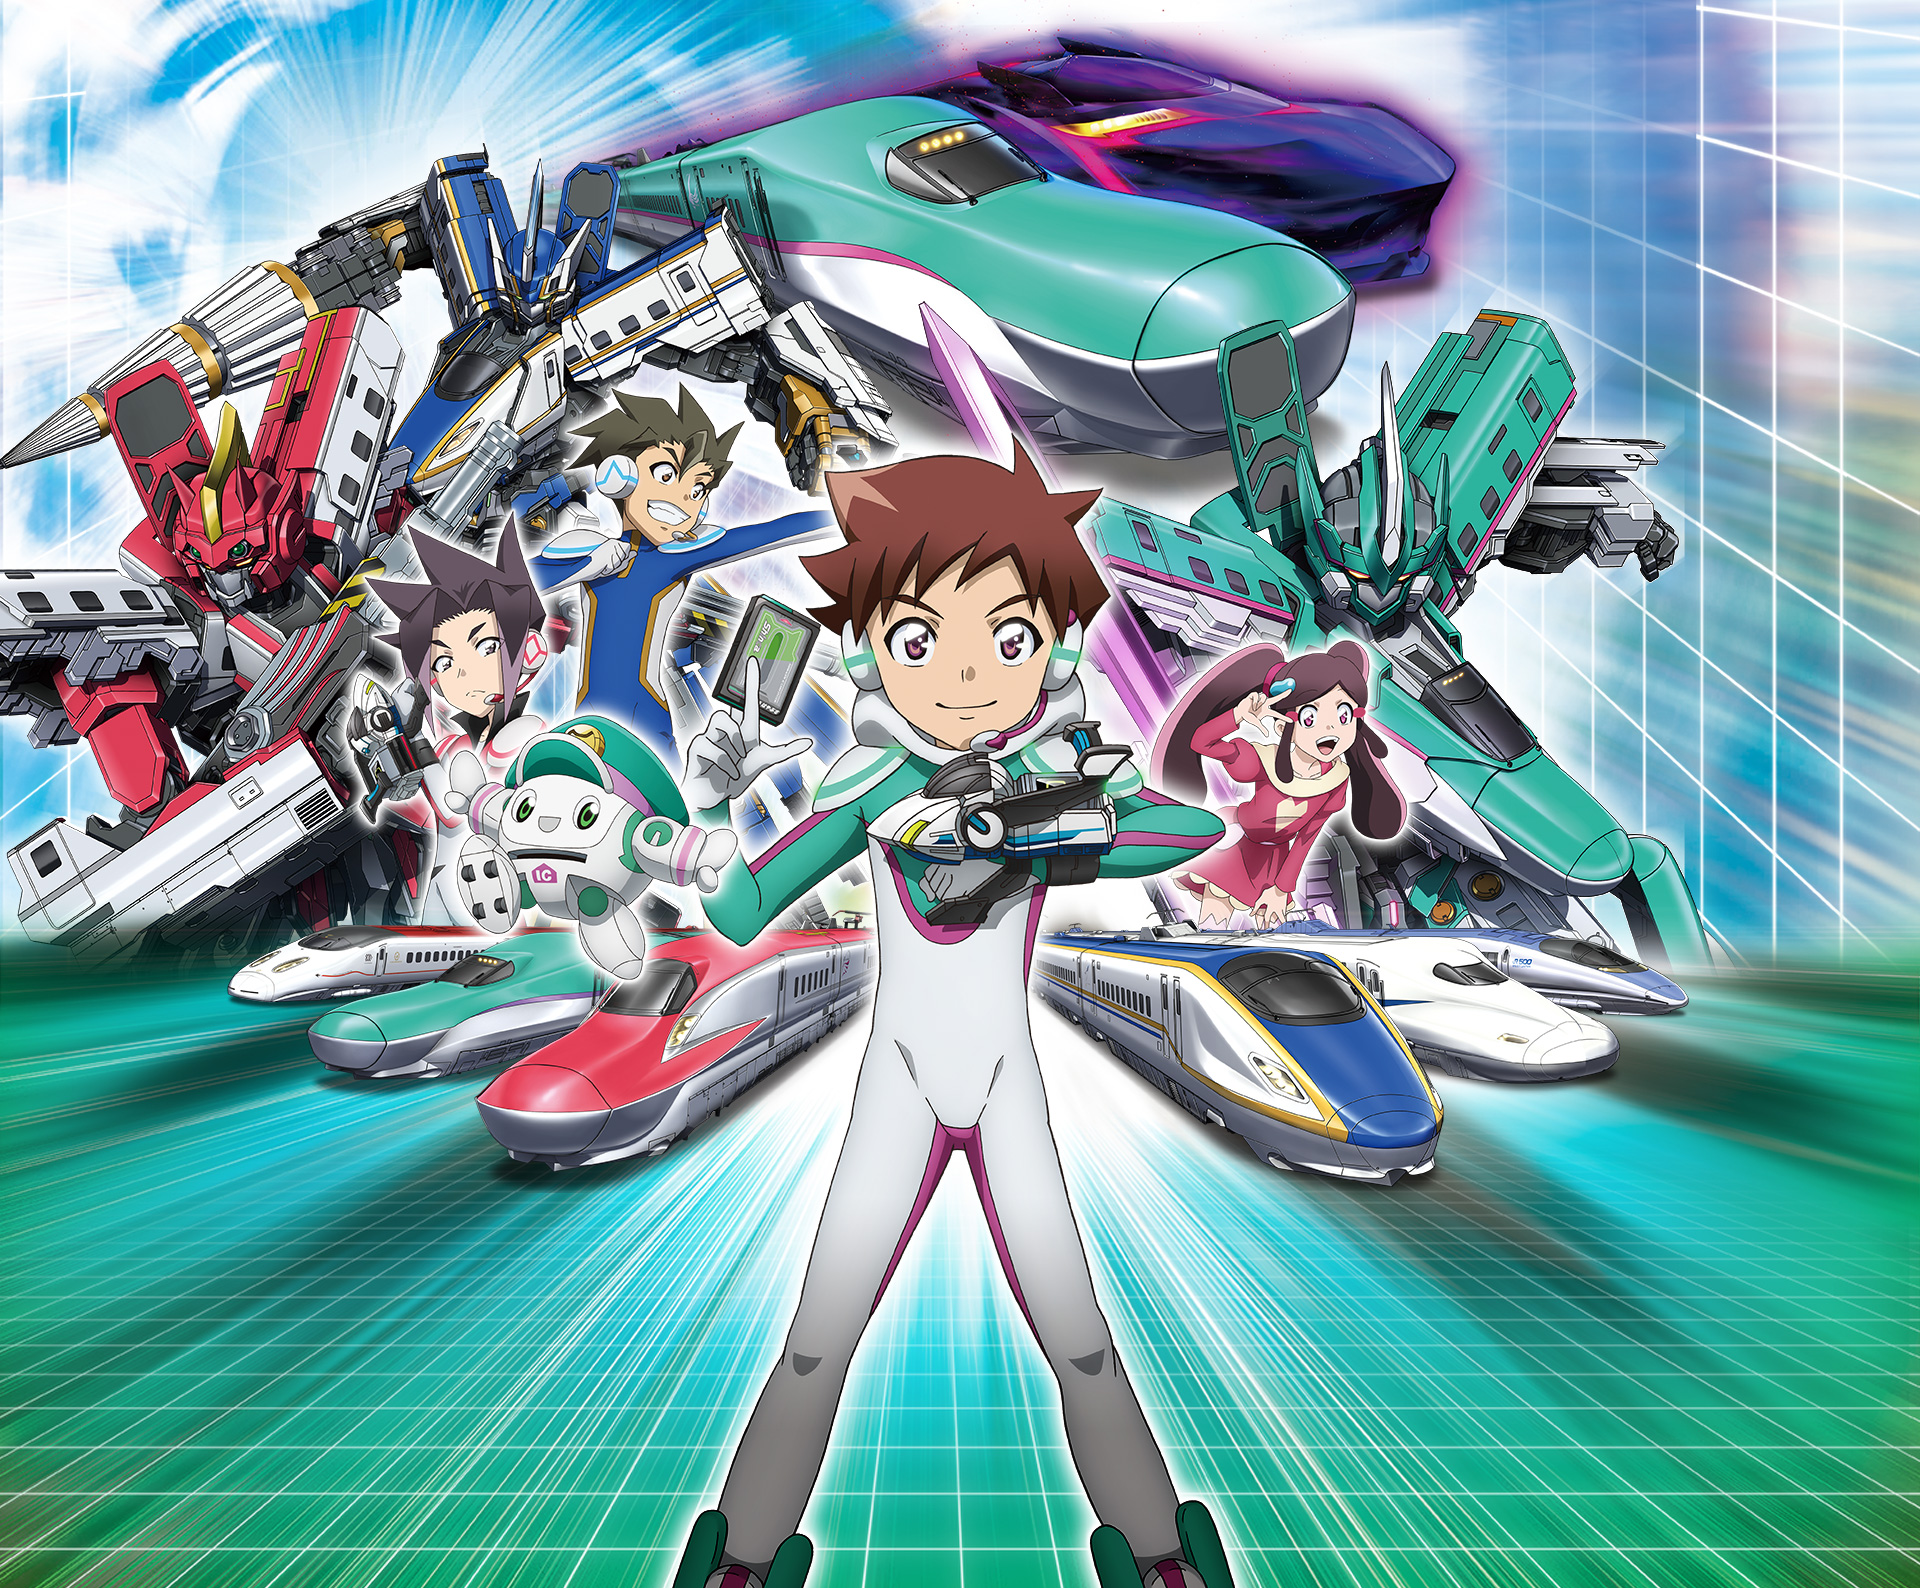 Thoughts on Shinkalion the Robot Anime Designed to Promote Bullet Trains   OGIUE MANIAX